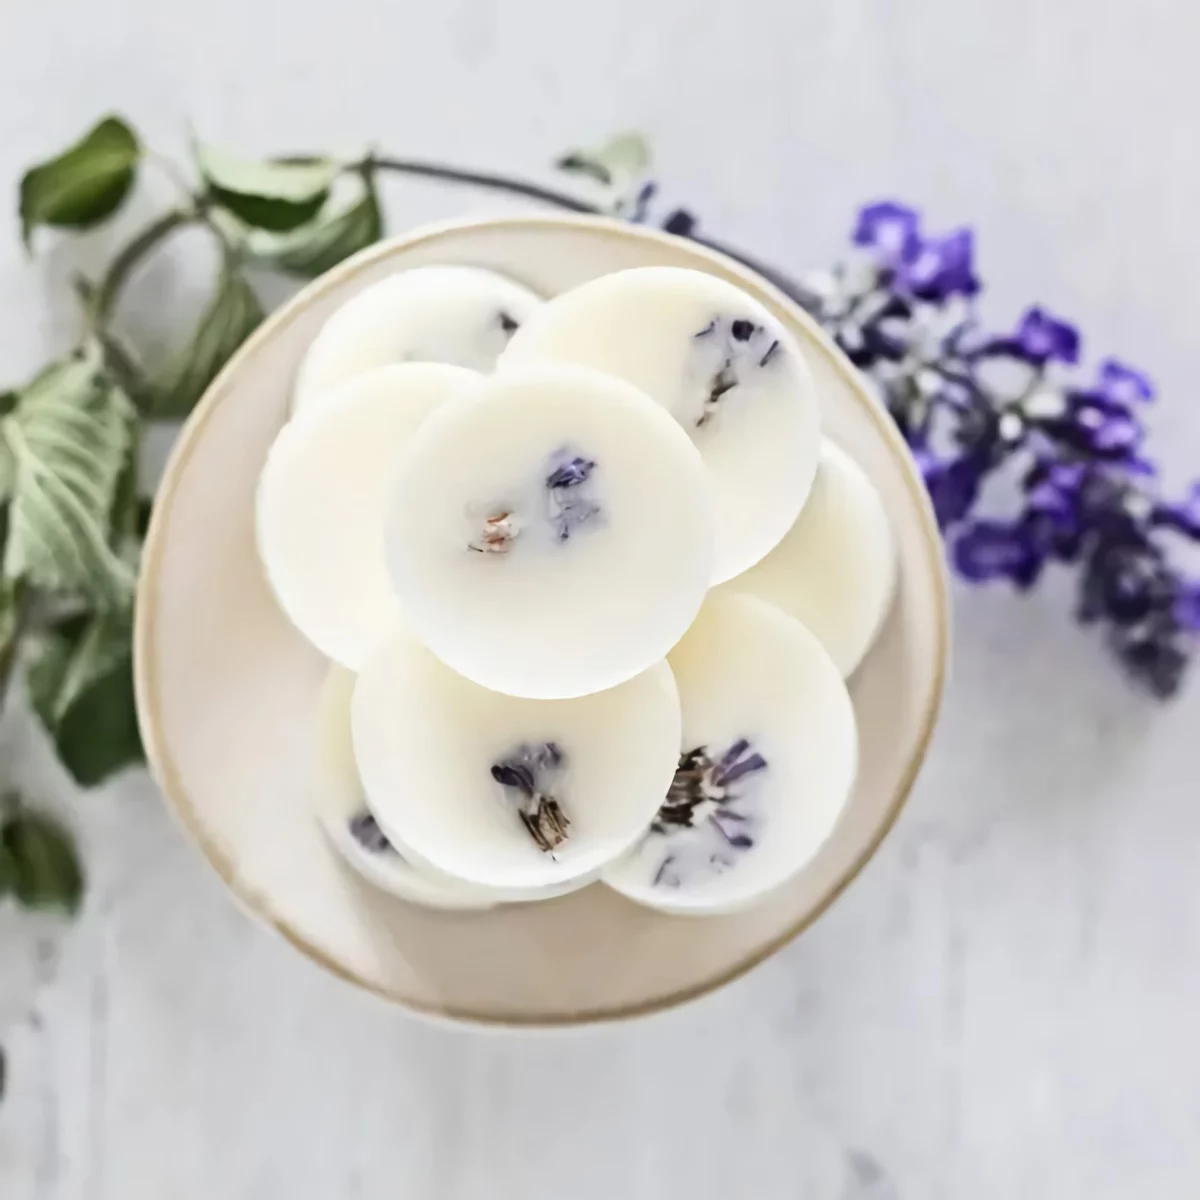 insta dried flower candle melts 2